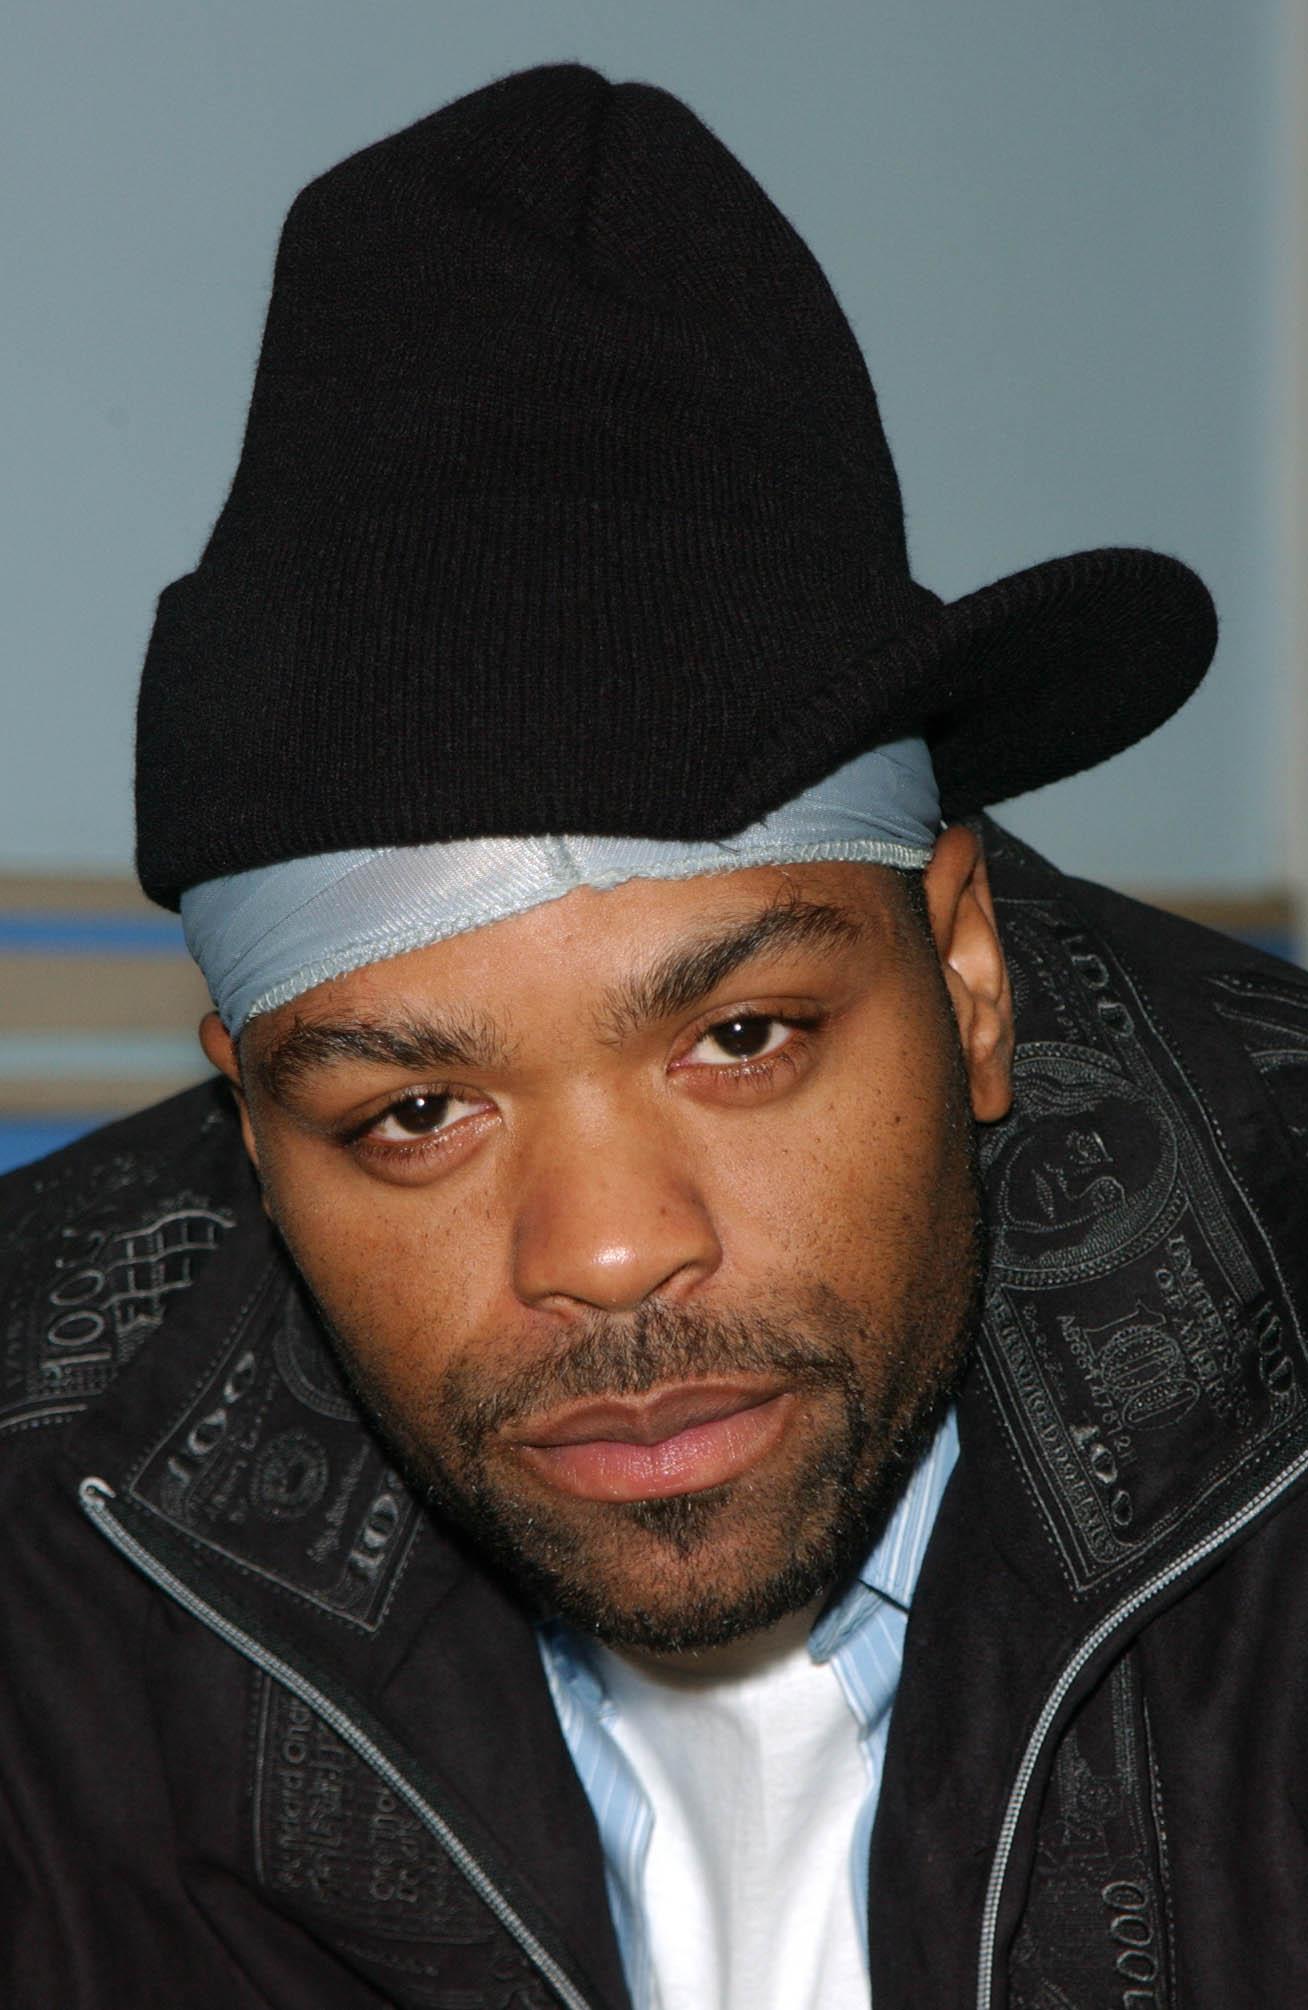 The Delegation Agrees, Method Man Is Still Fine As Hell